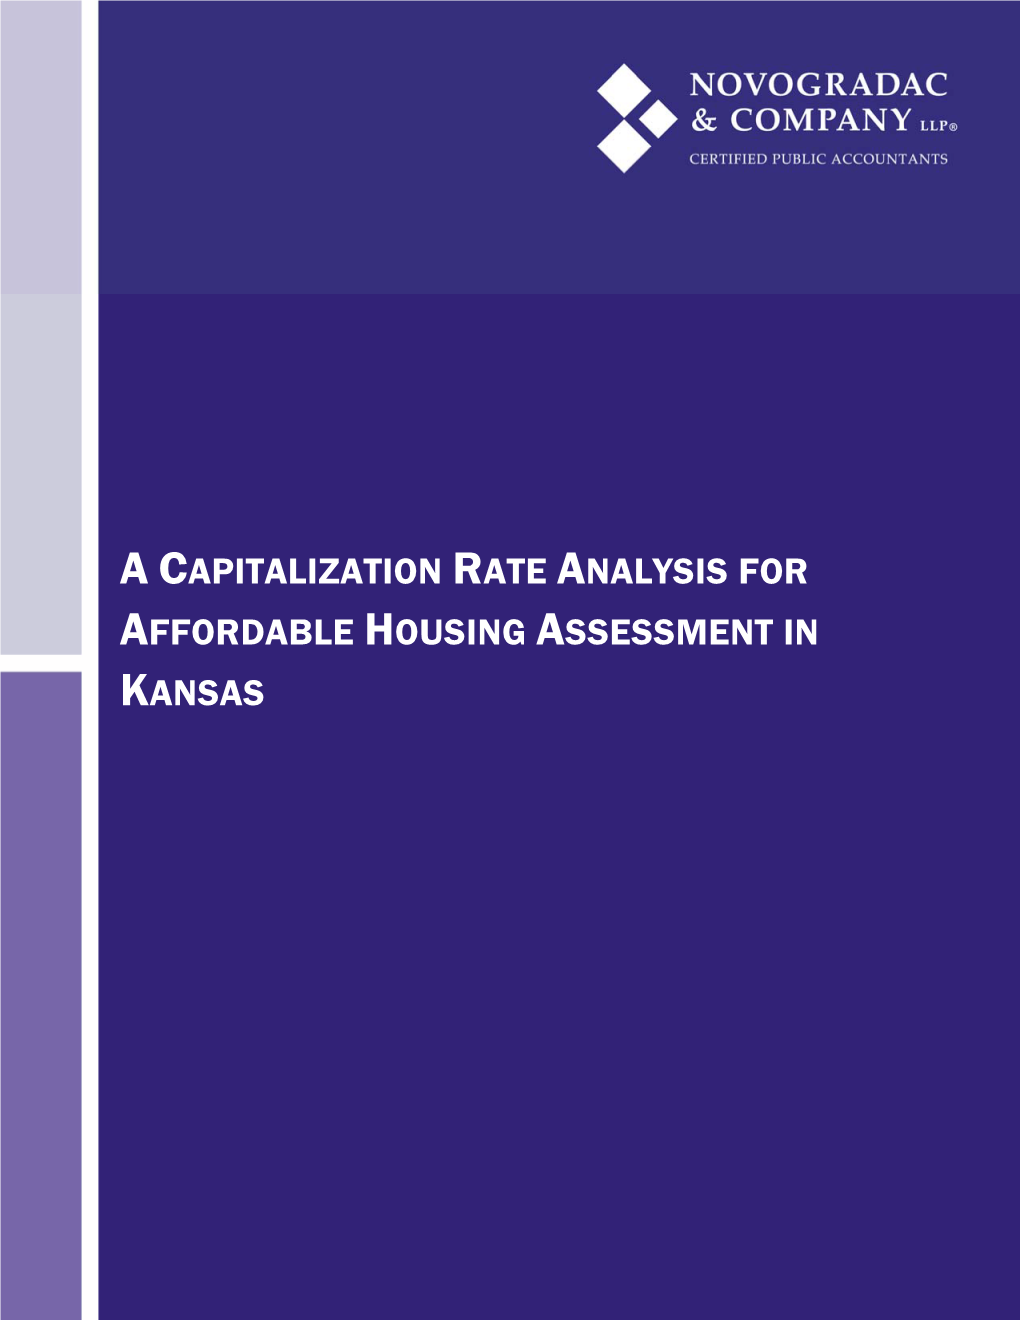 A Capitalization Rate Analysis for Affordable Housing Assessment in Kansas